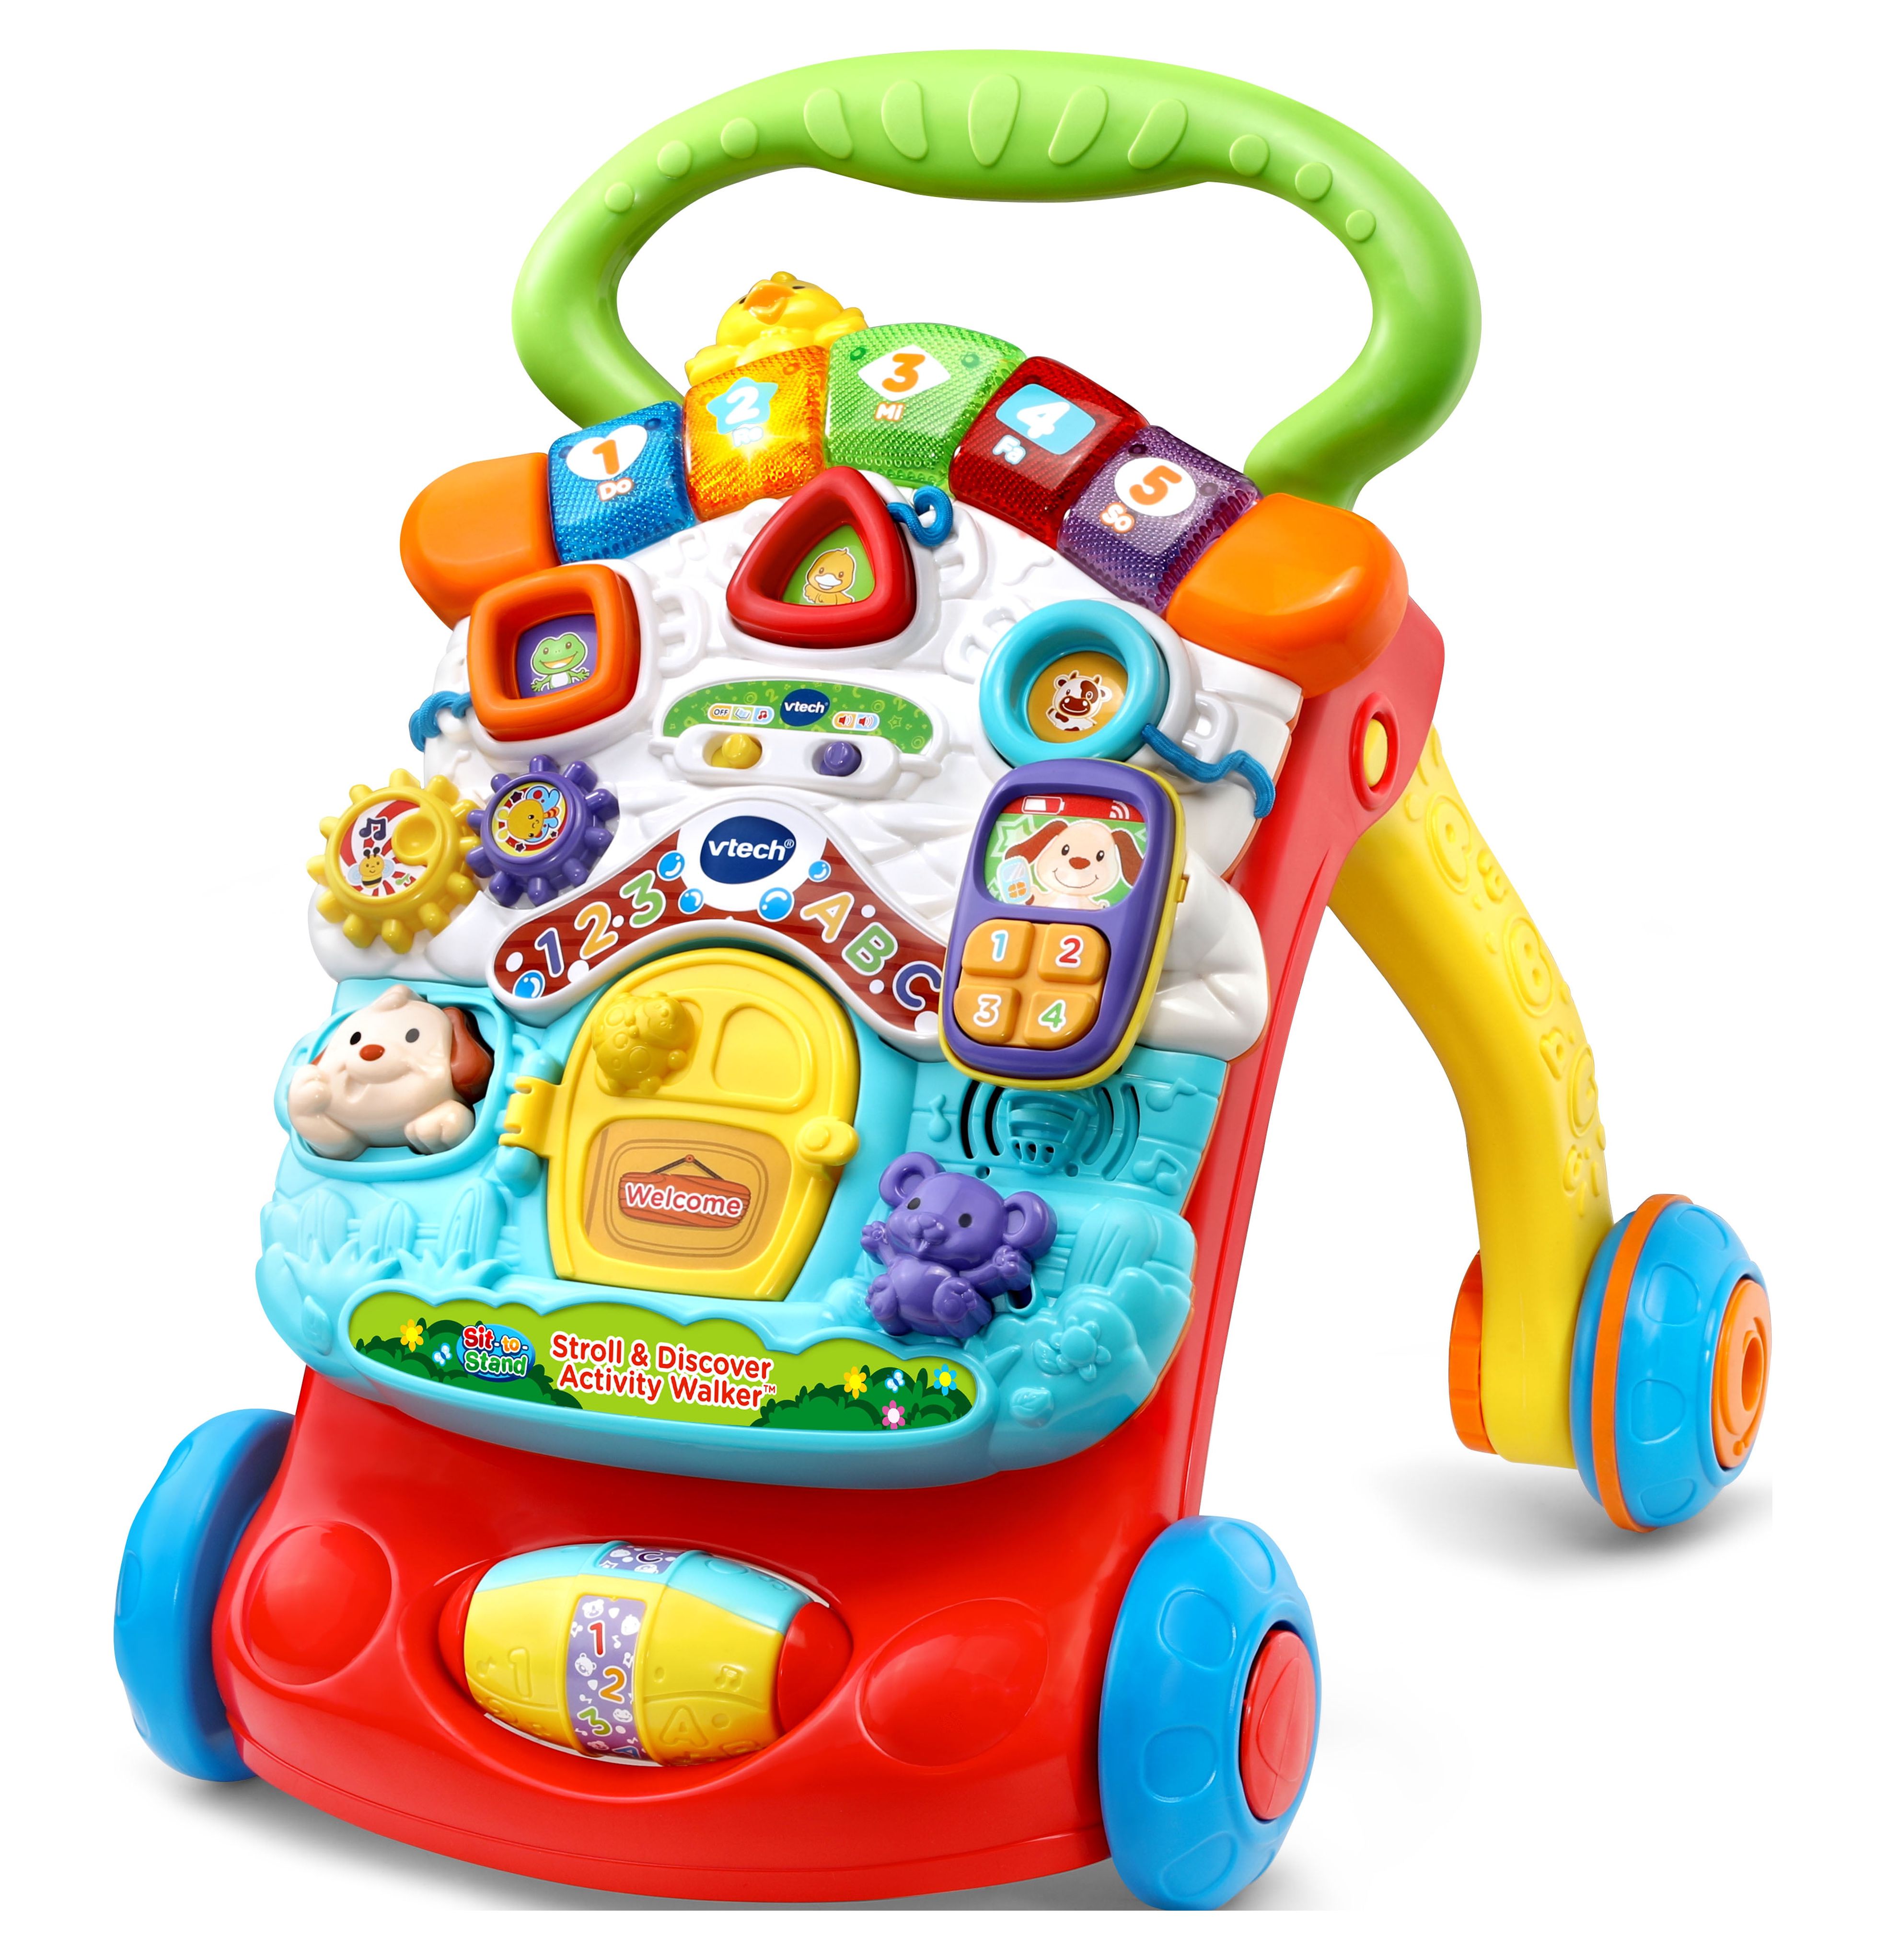 VTech Stroll & Discover Activity Walker 2 -in-1 Unisex Baby & Toddler Toy - image 1 of 16